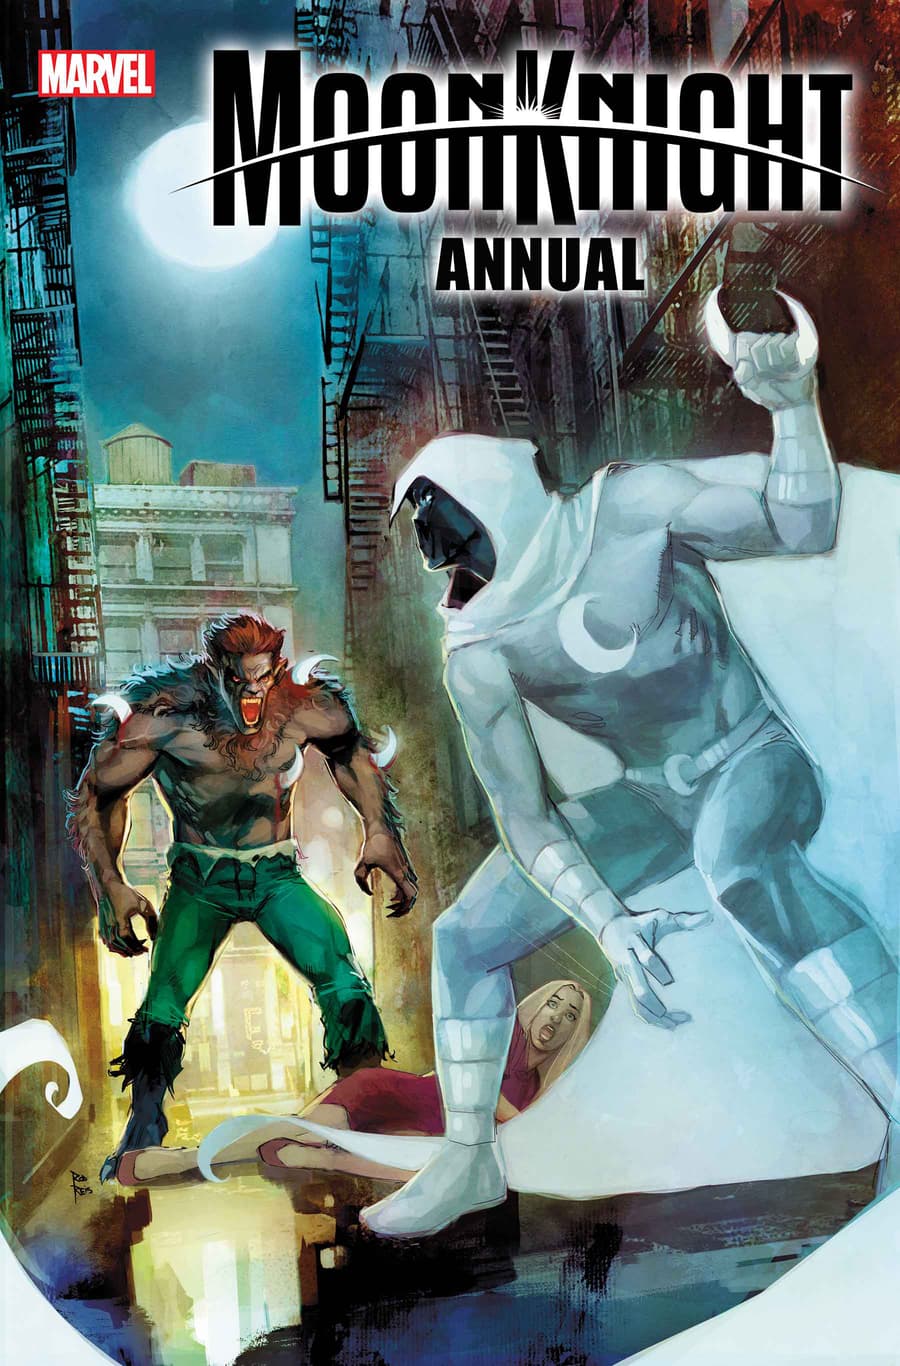 MOON KNIGHT ANNUAL (2022) #1 cover by Rod Reis